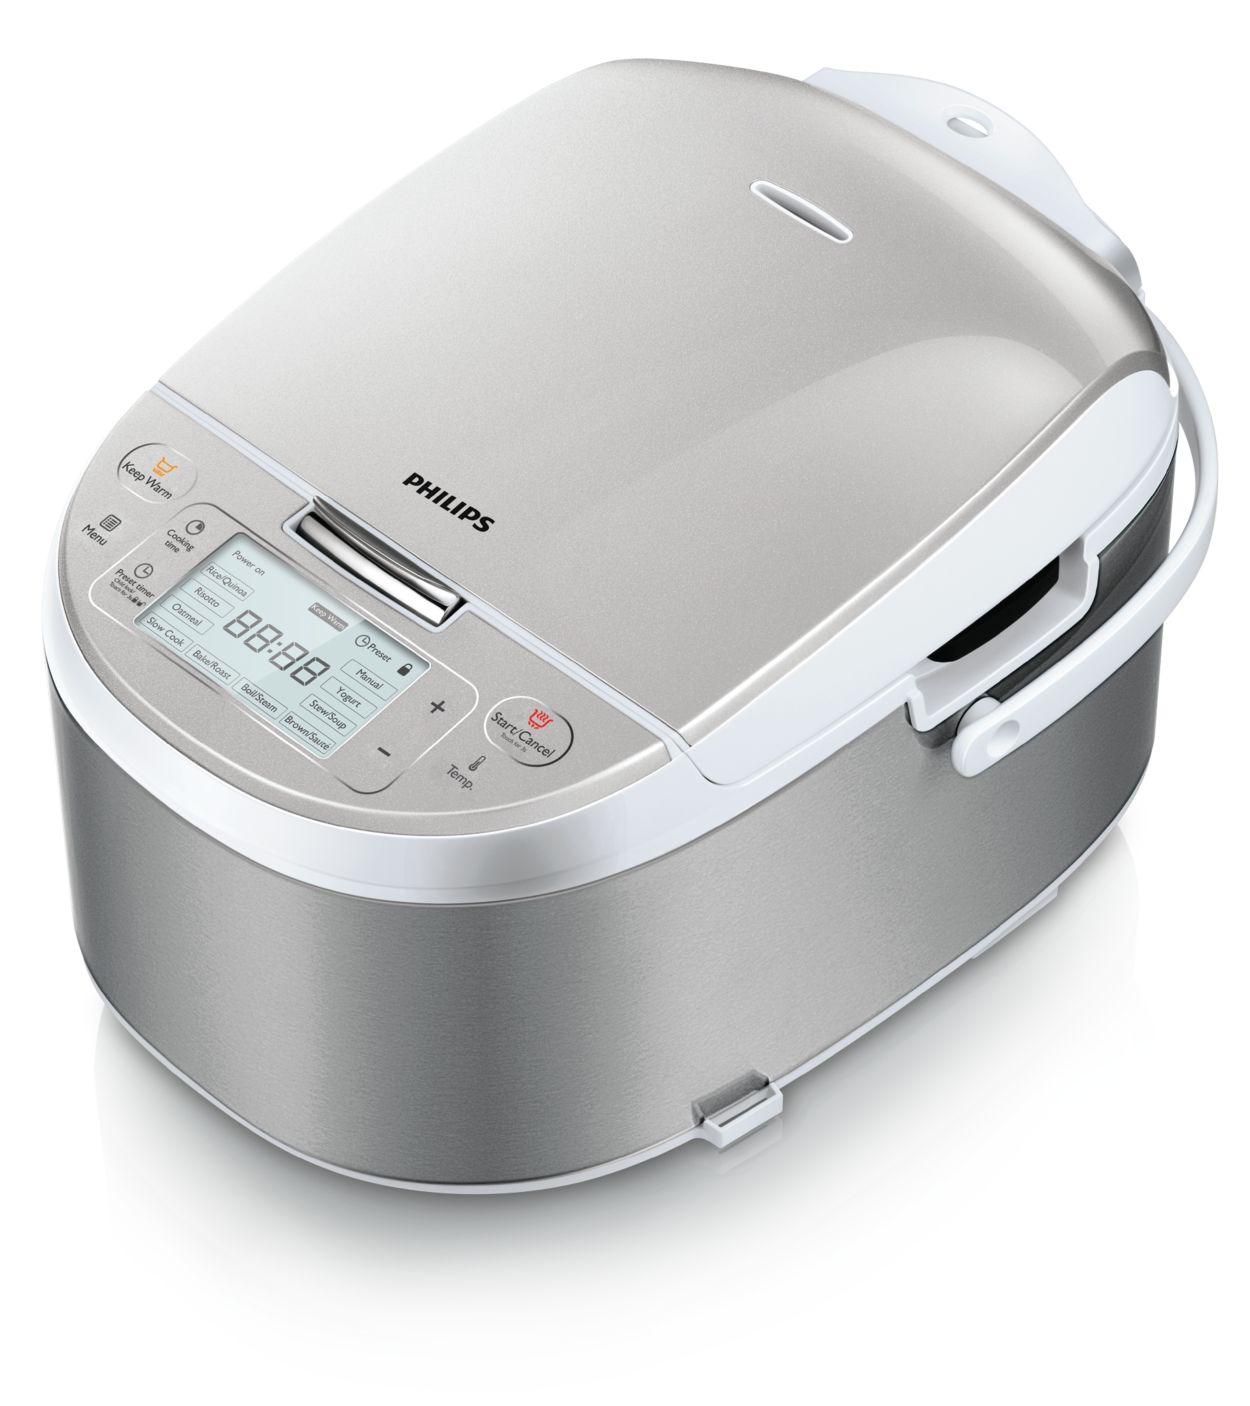 Philips Soup Maker and Multicooker with MealEasy Voucher